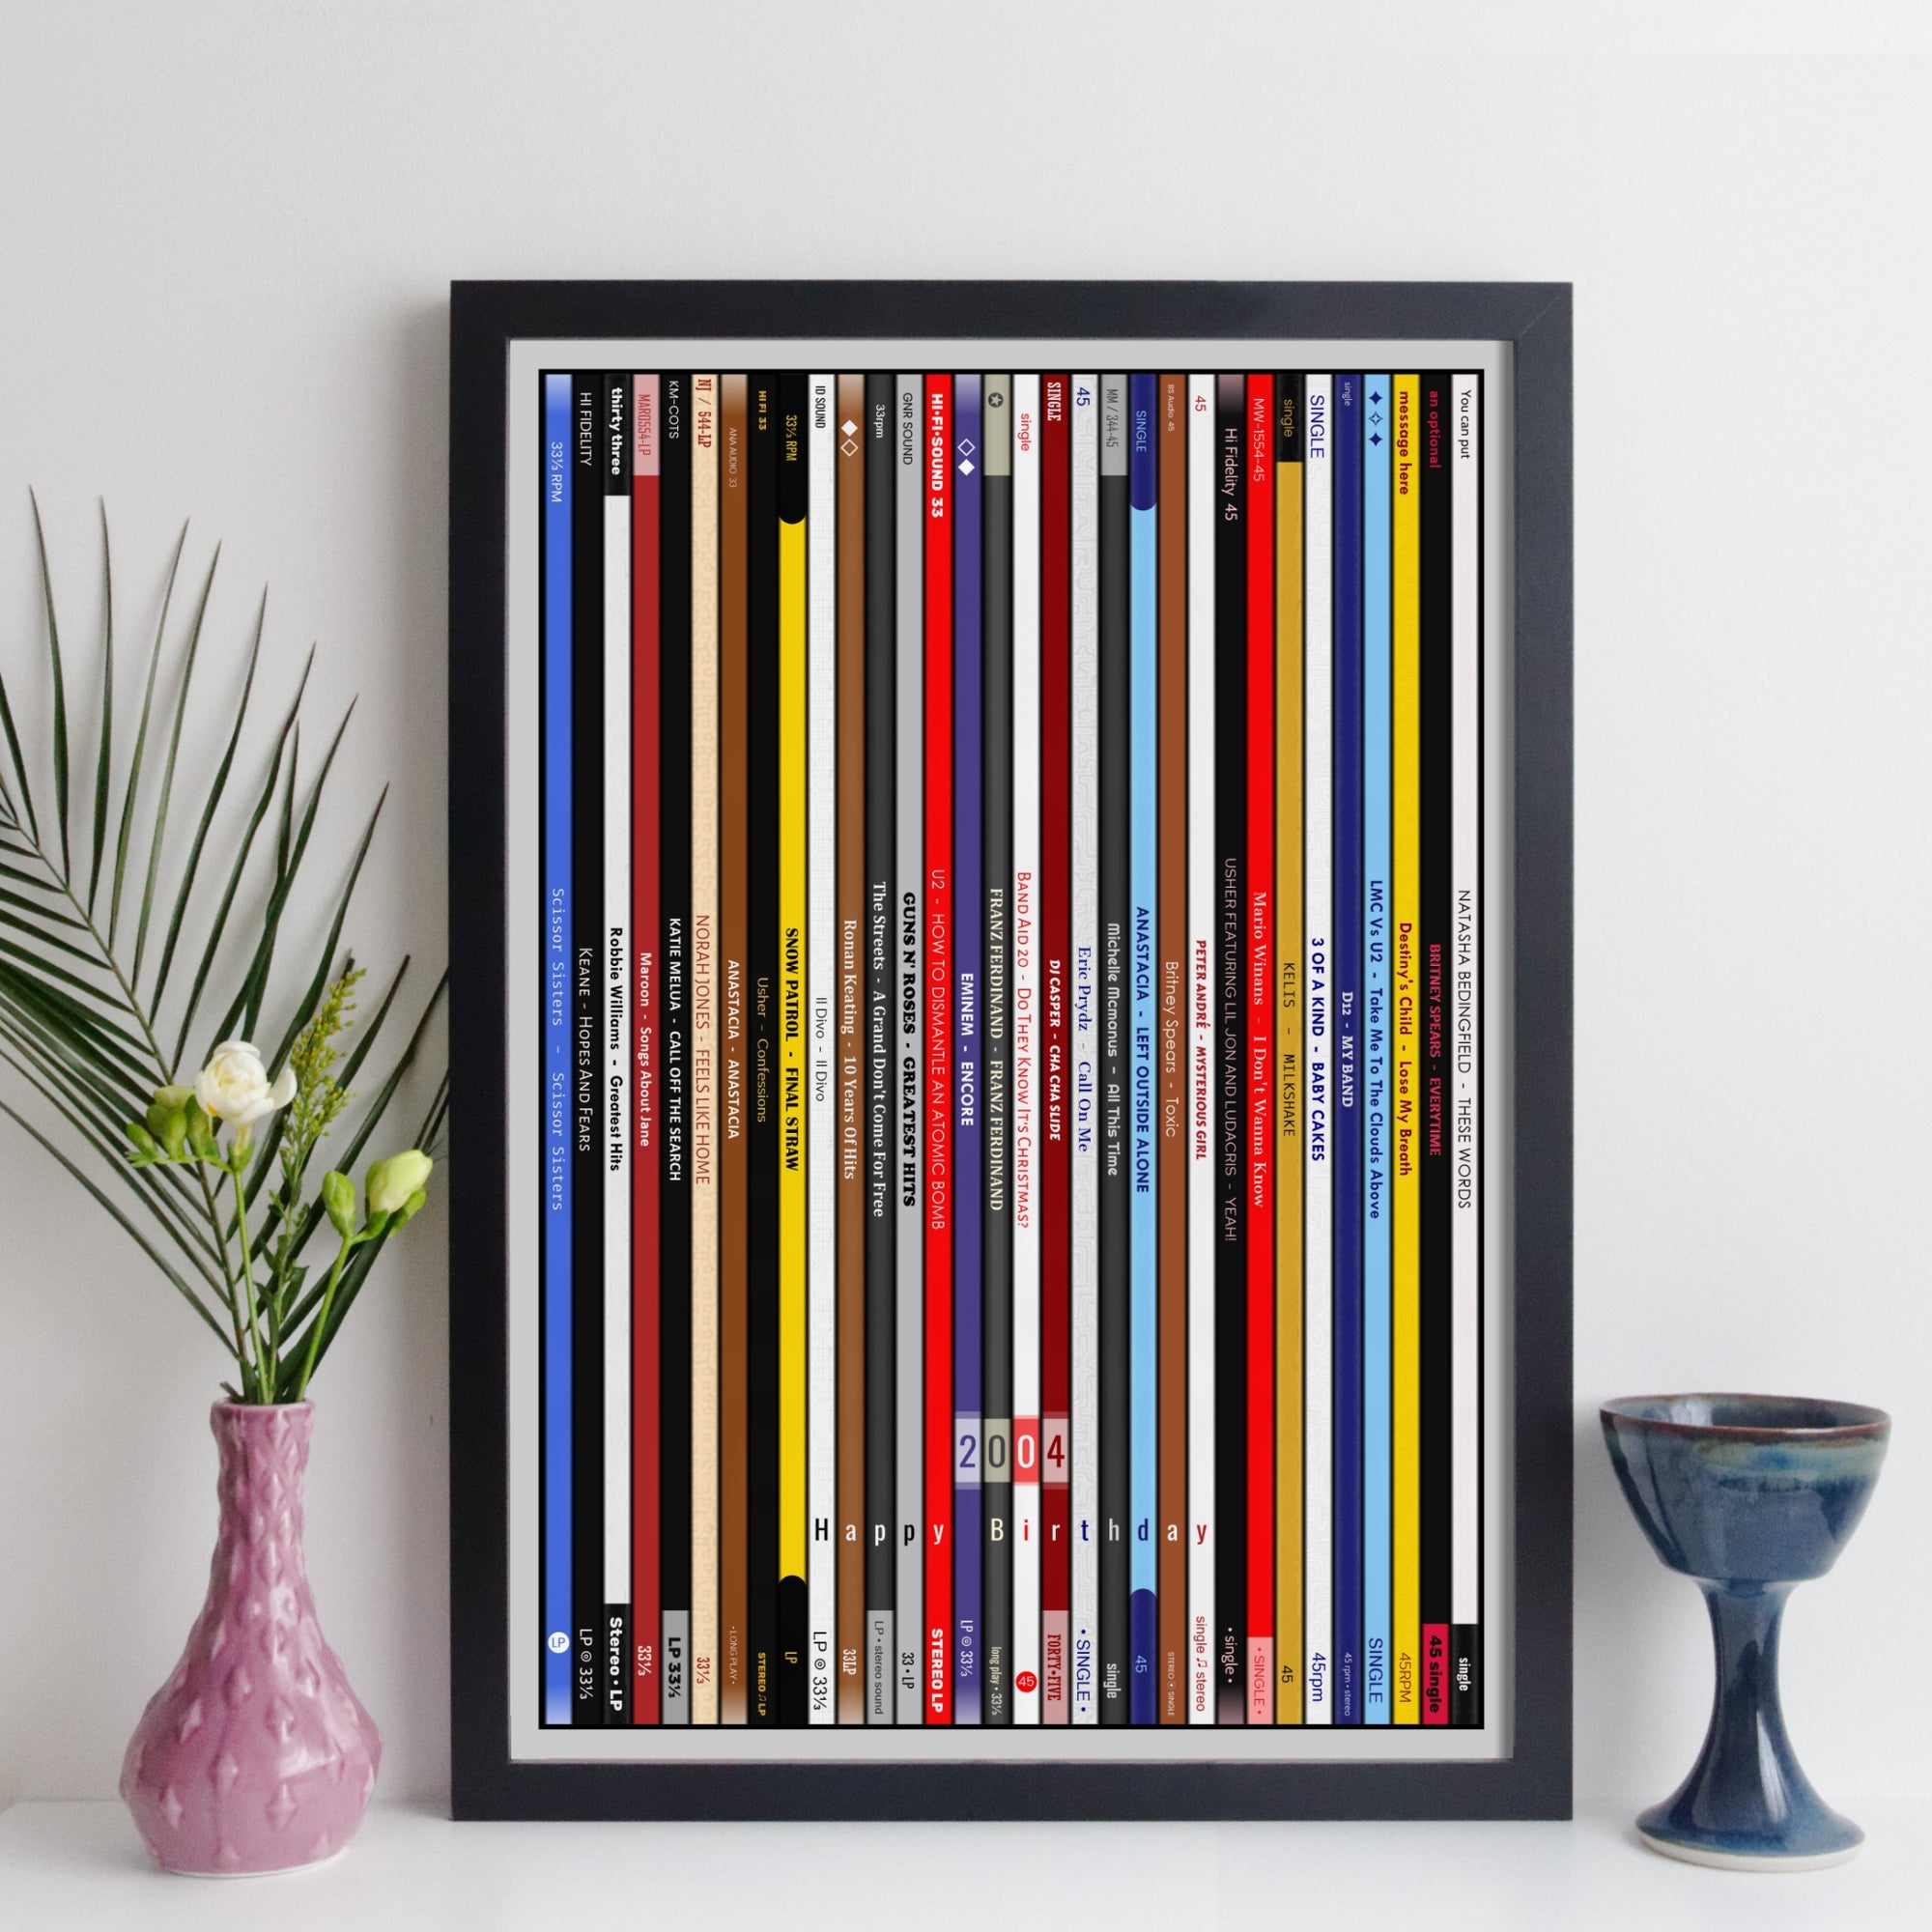 Personalised Music Print - 2004 UK Record Collection Print - 2004 birthday gift idea